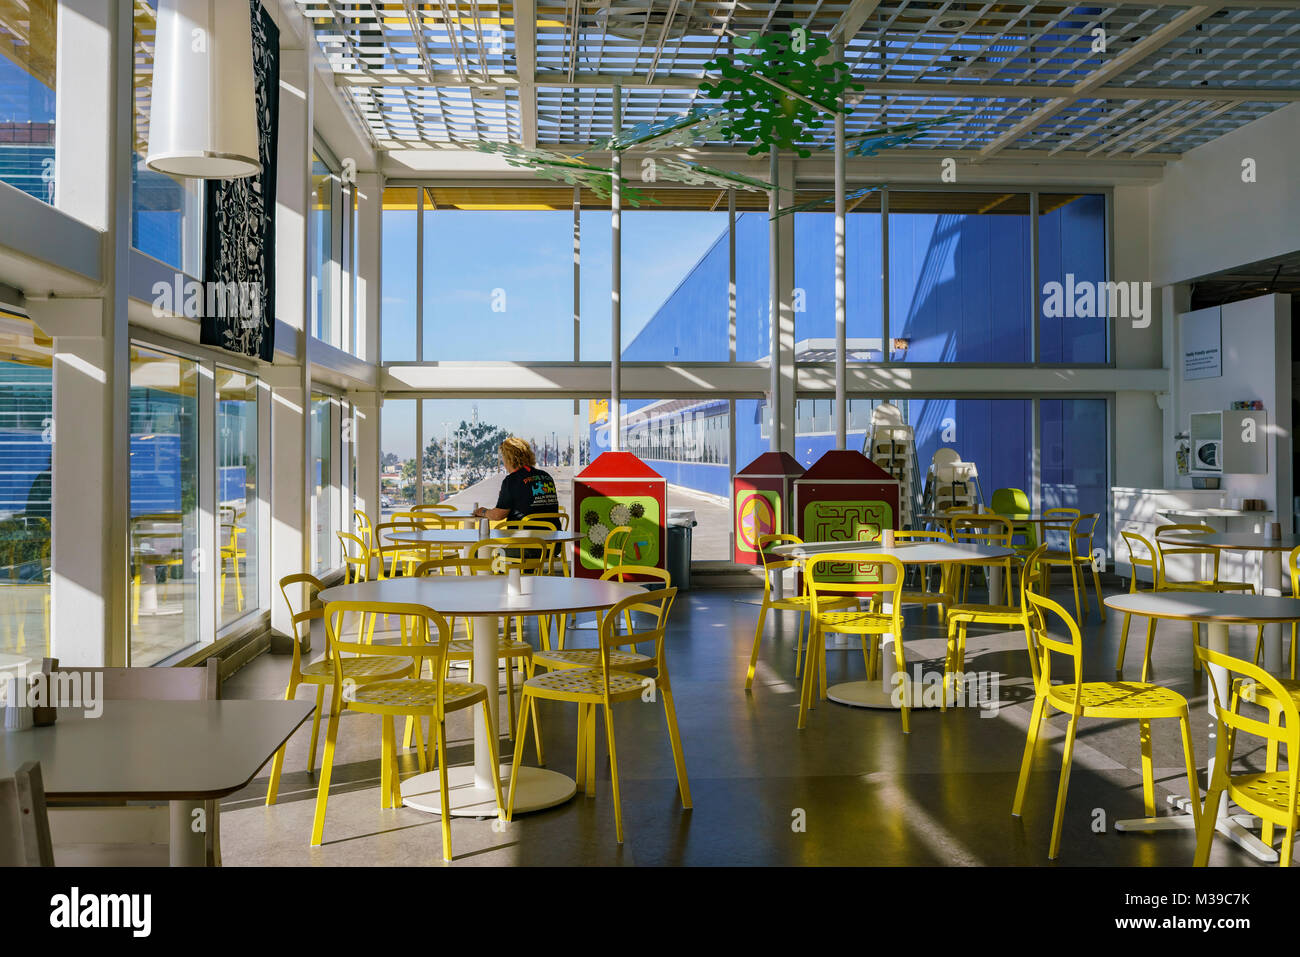 Los Angeles, DEC 28: Interior view of the famous IKEA furniture stores on  DEC 28, 2017 at Los Angeles, California Stock Photo - Alamy